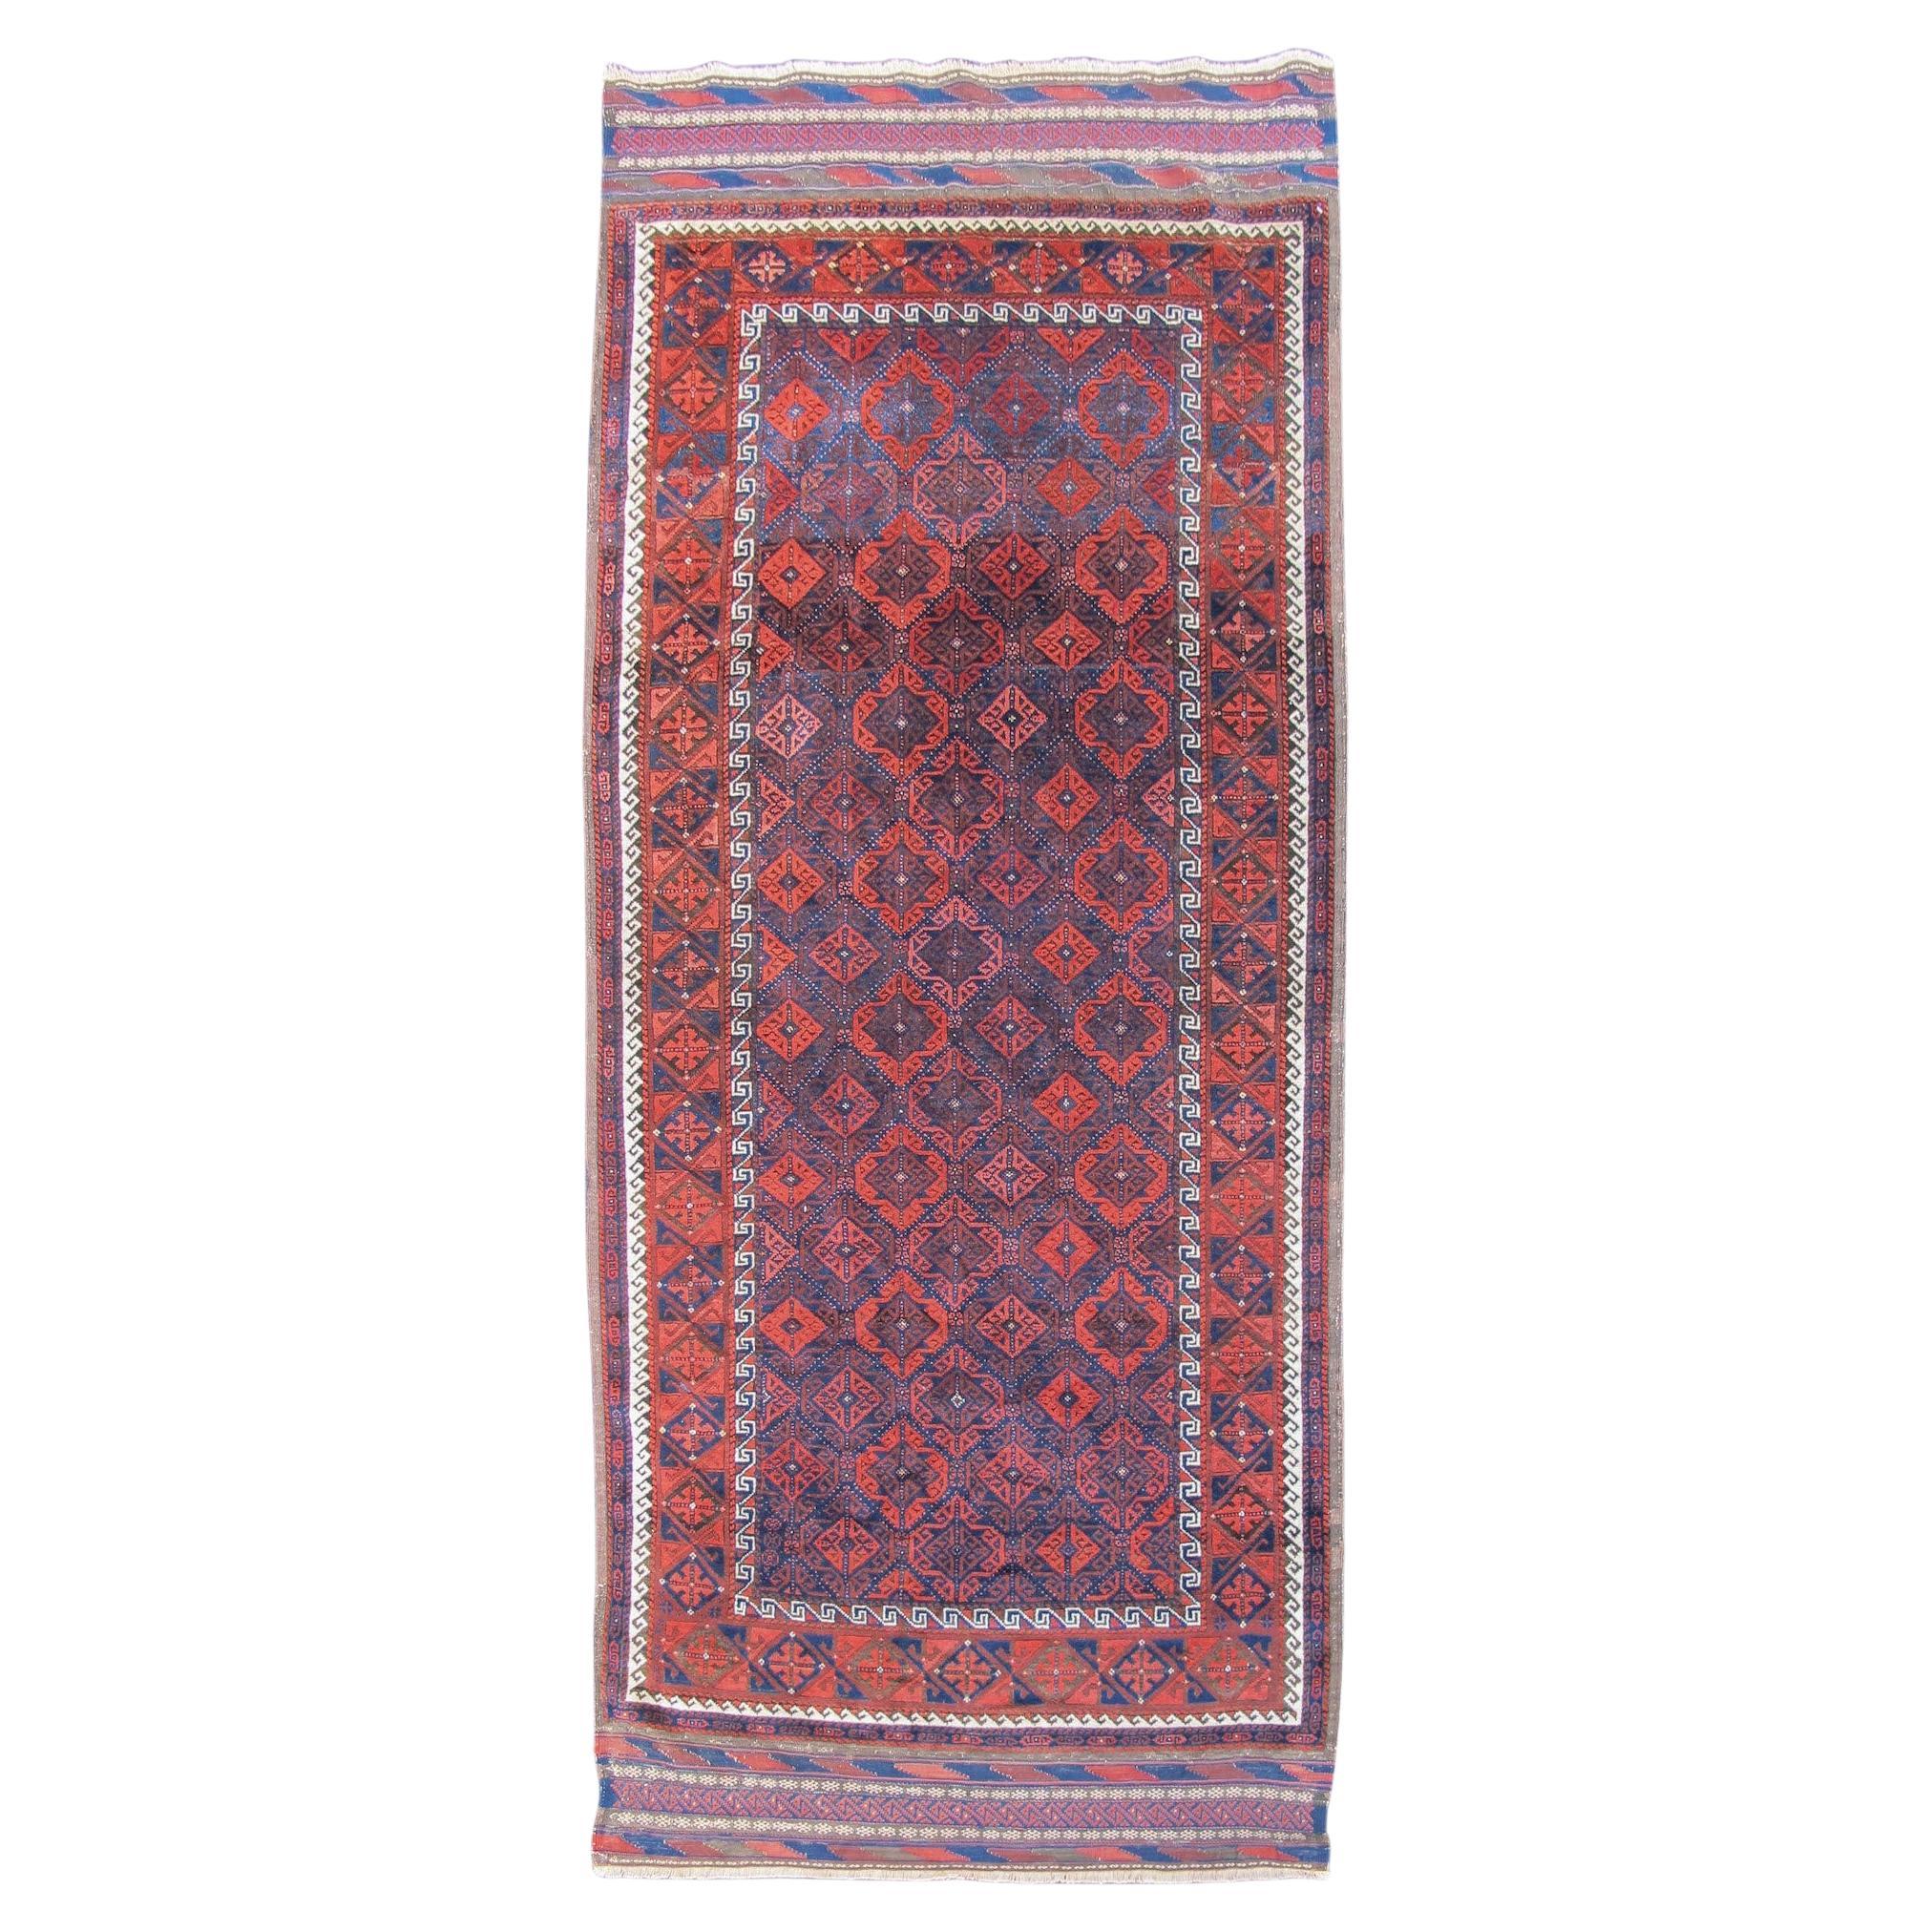 Antique Persian Baluch Runner Rug, Late 19th Century For Sale